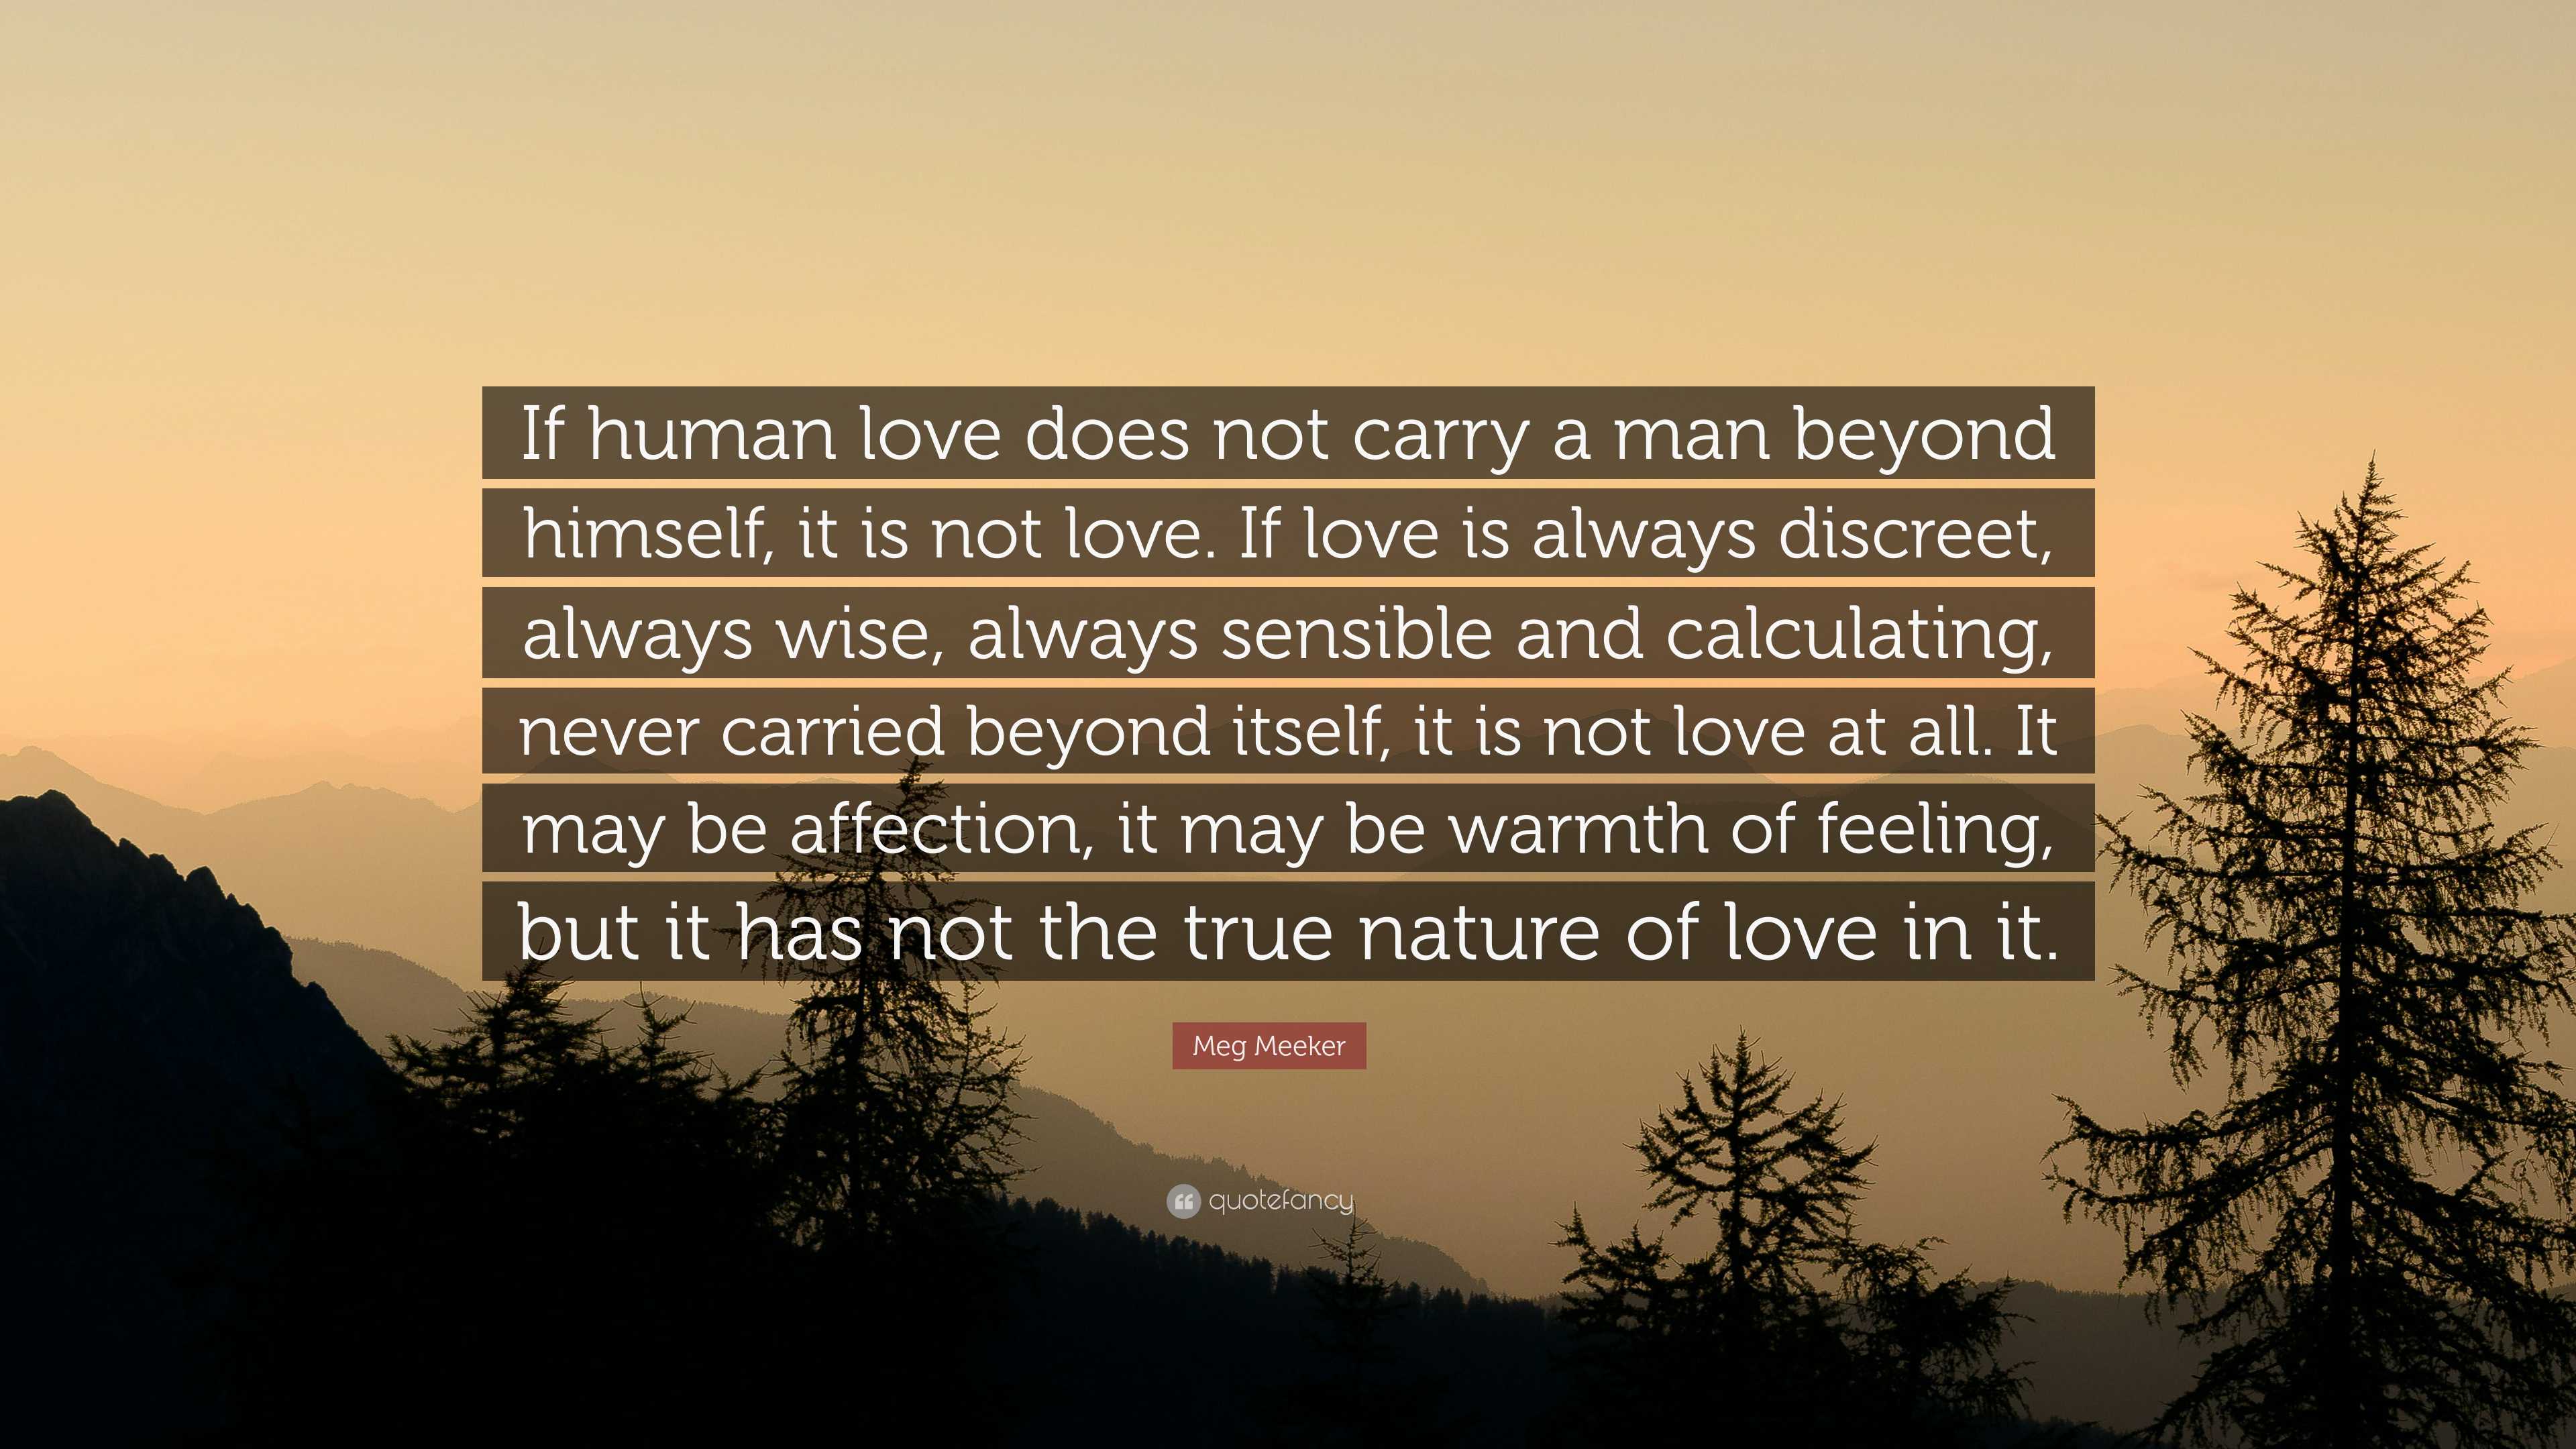 Meg Meeker Quote: “If human love does not carry a man beyond himself ...